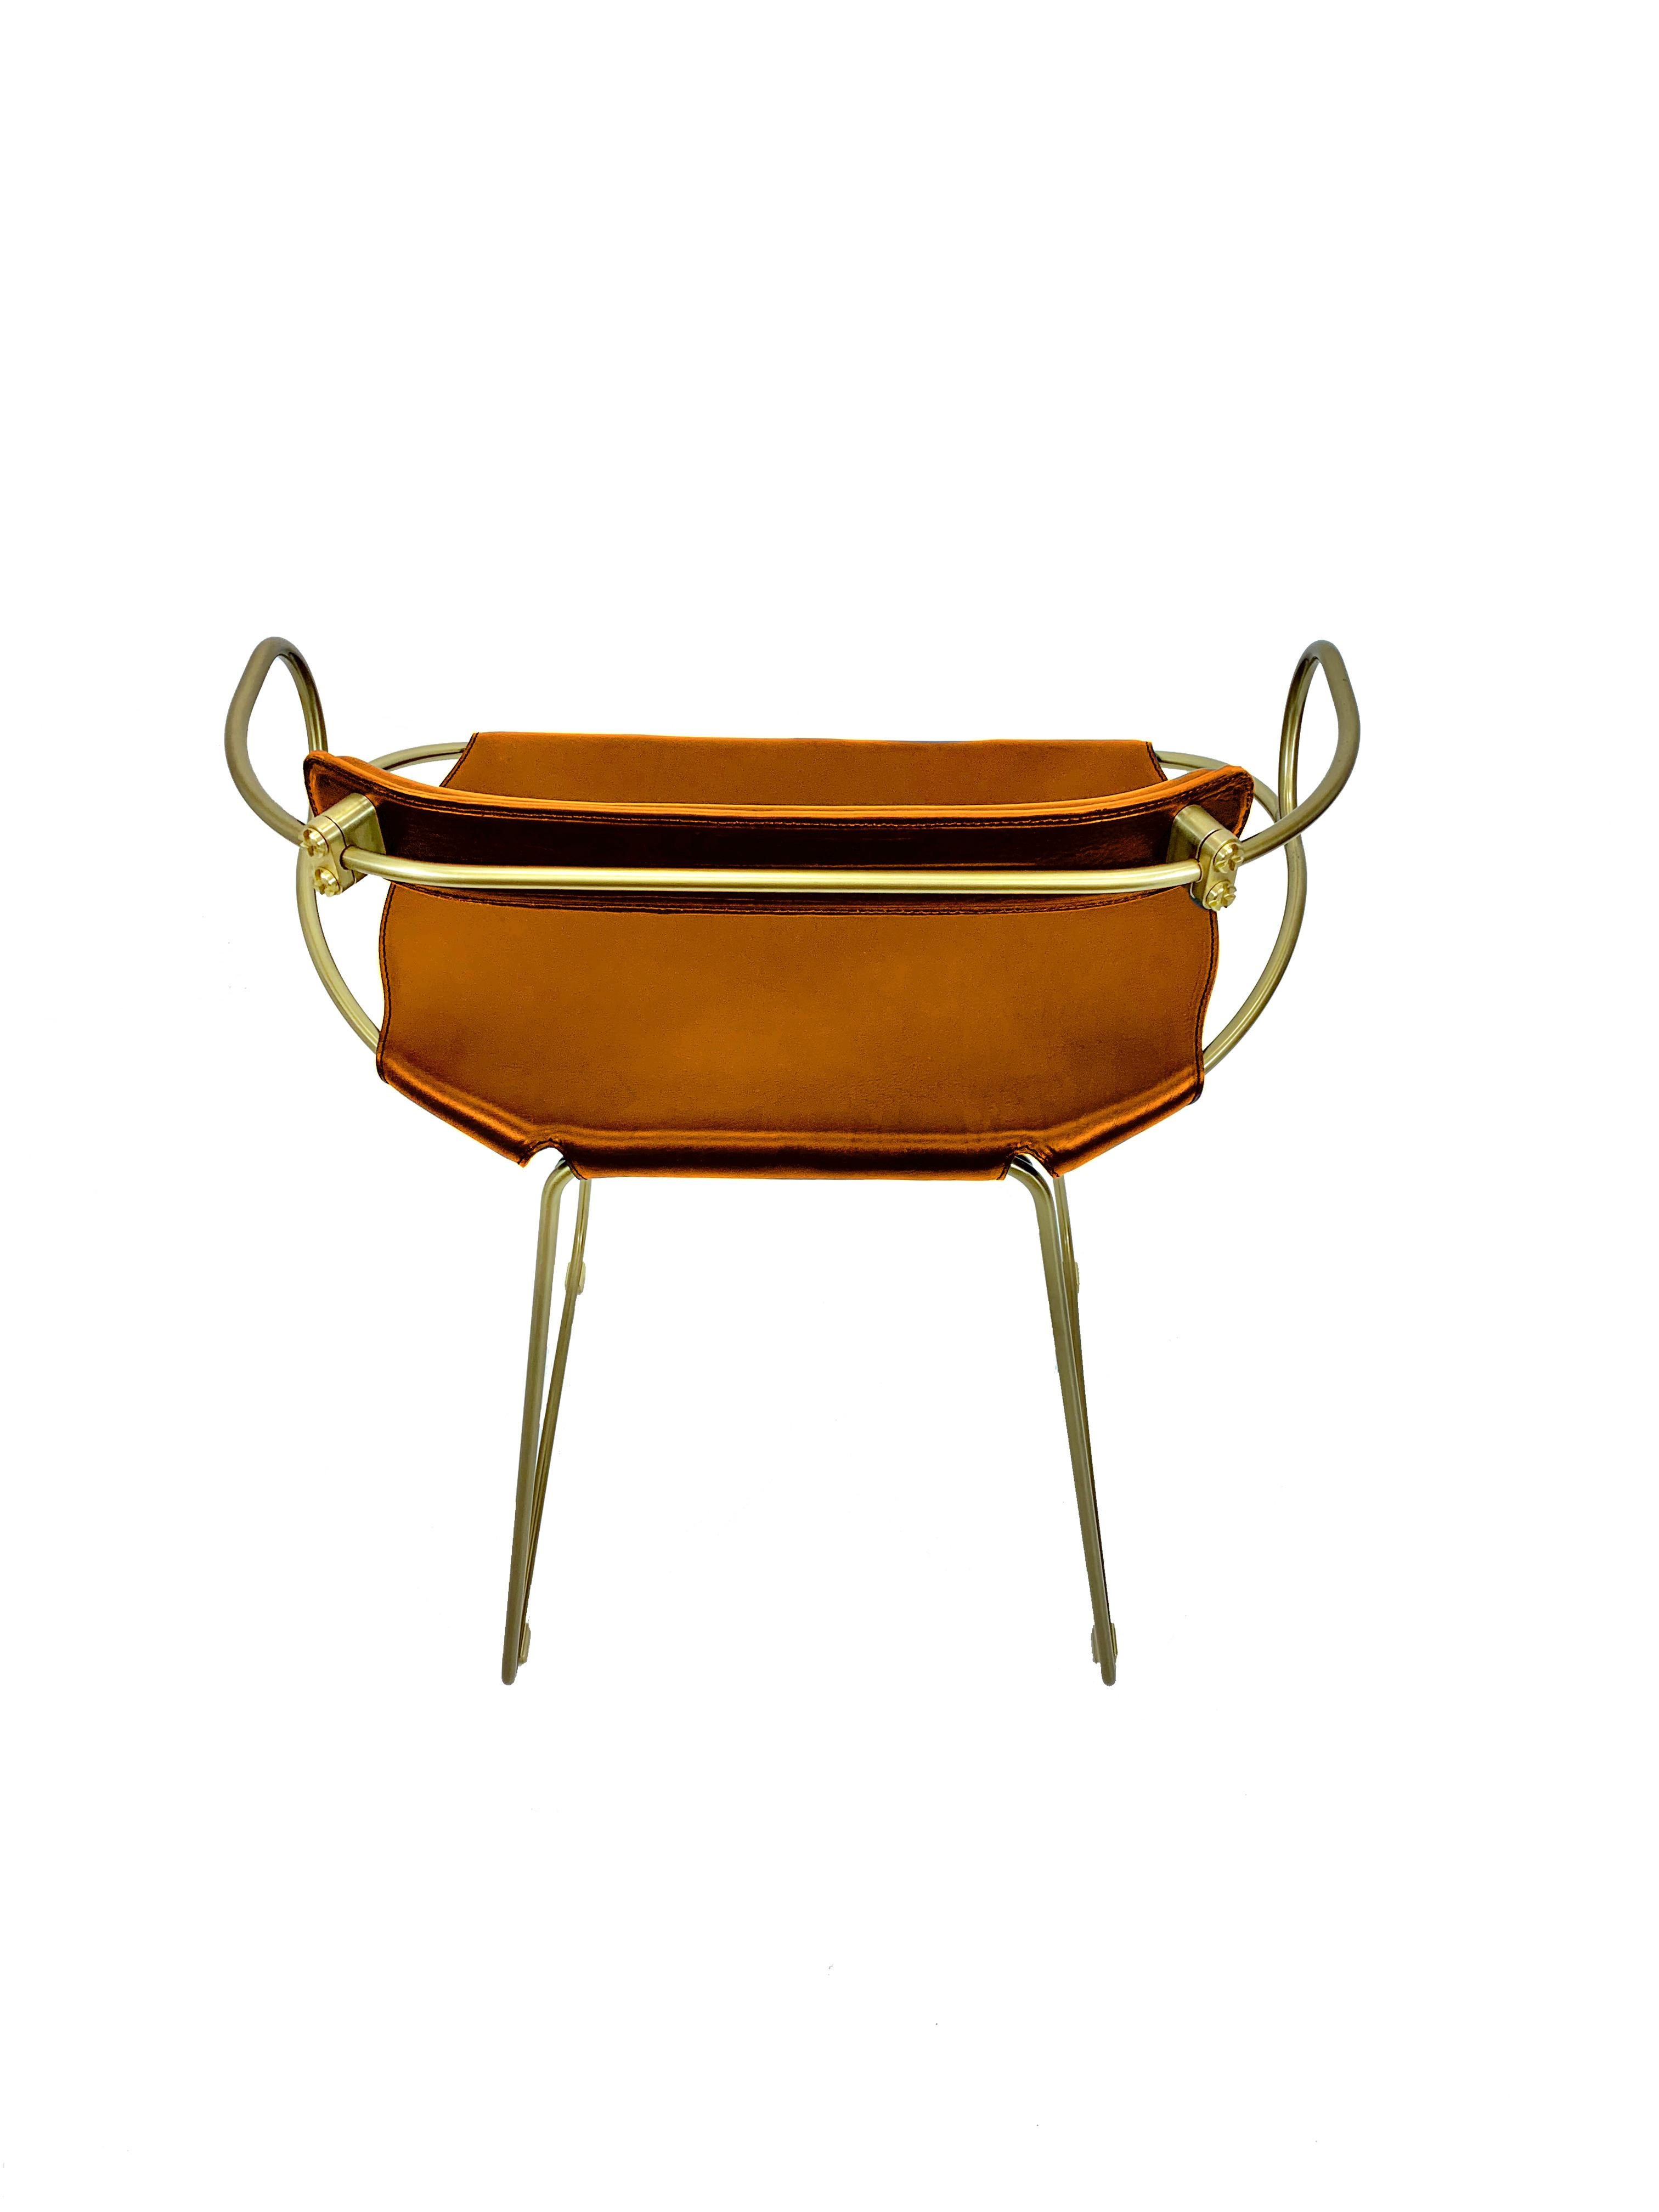 Spanish Contemporary Bar Stool w. Backrest Aged Brass Metal & Natural Tobacco Leather For Sale